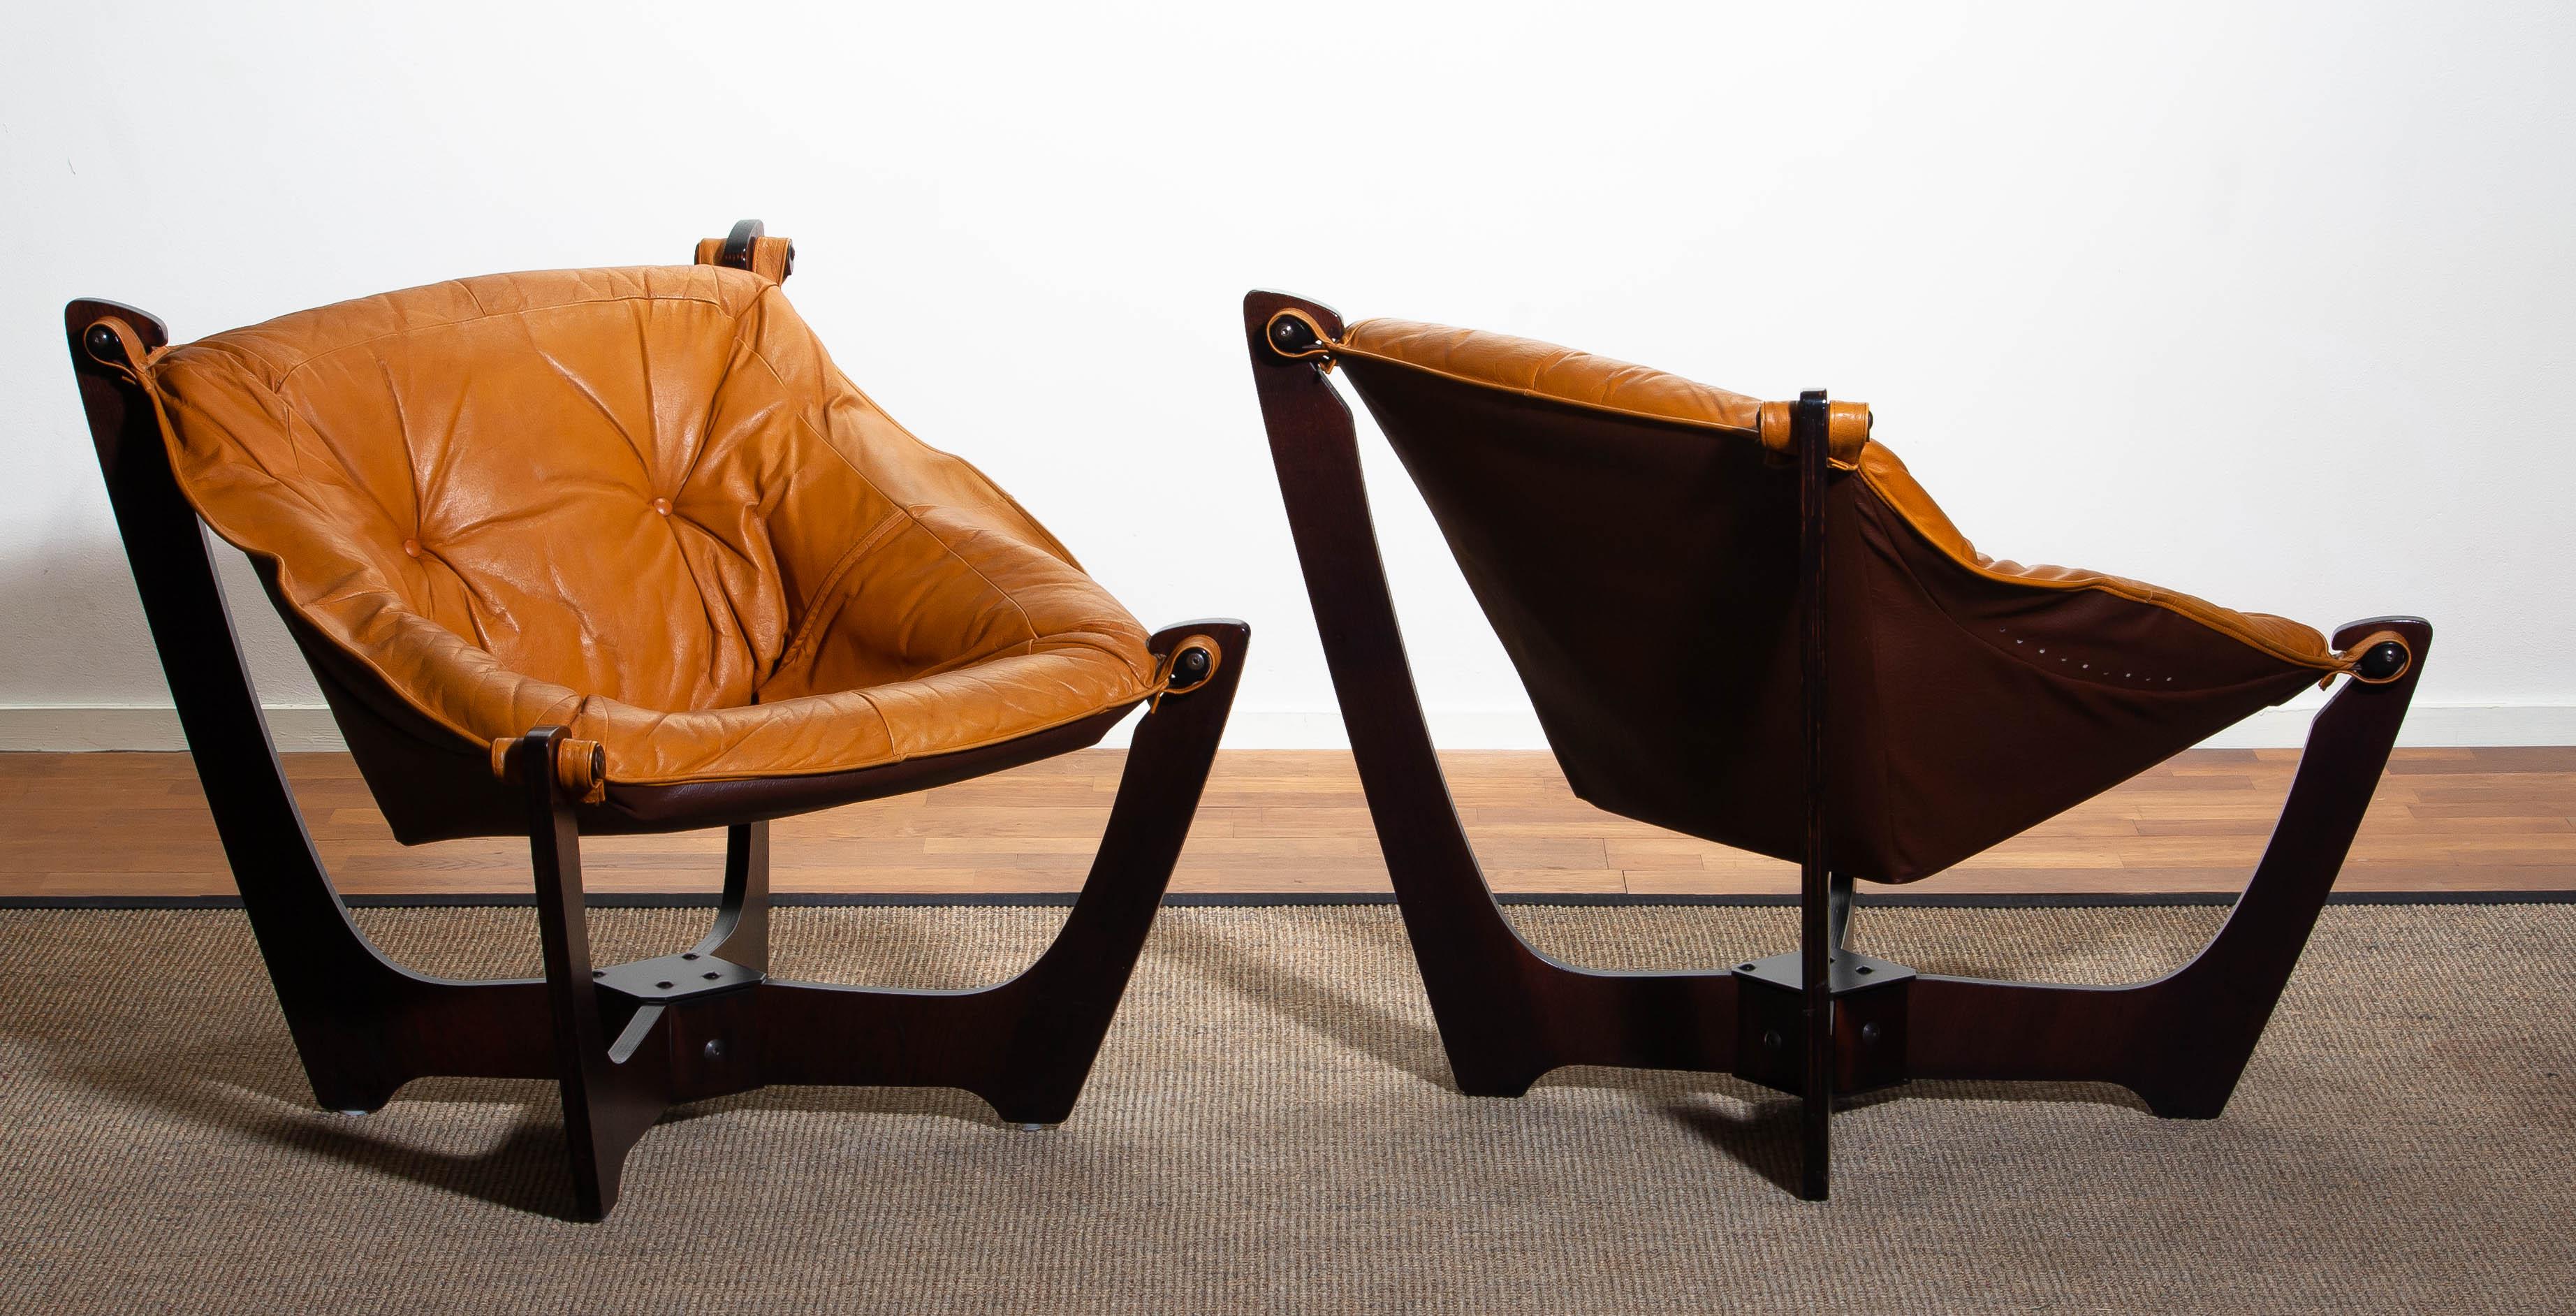 1970 Pair of Leather Lounge Chairs by Odd Knutsen for Hjellegjerde Møbler Norway 5